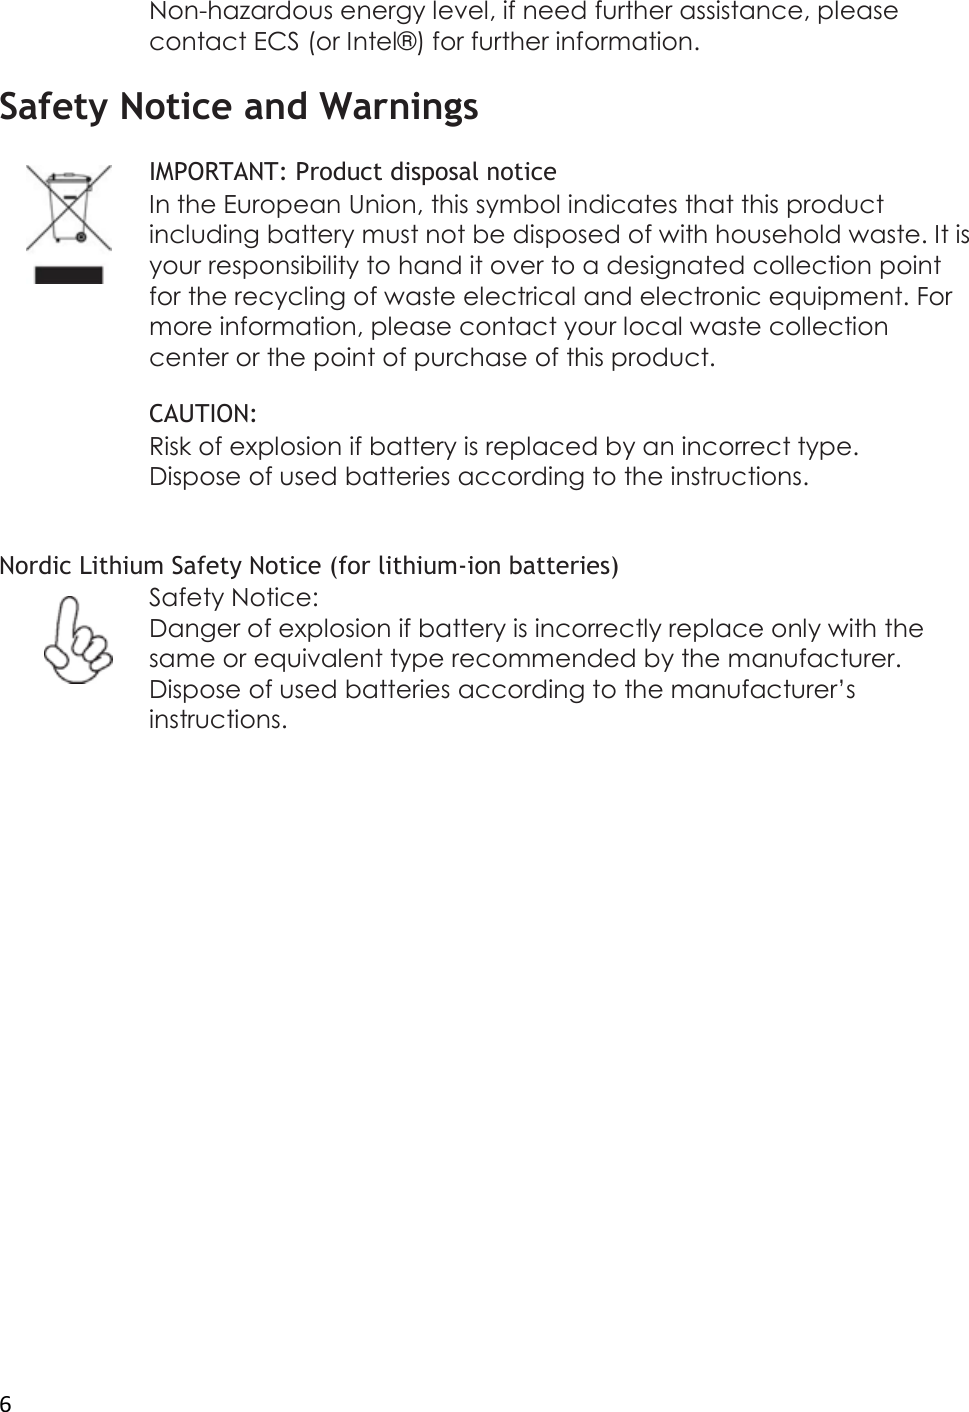  6 Non-hazardous energy level, if need further assistance, please contact ECS (or Intel® ) for further information.  Safety Notice and Warnings  IMPORTANT: Product disposal notice In the European Union, this symbol indicates that this product including battery must not be disposed of with household waste. It is your responsibility to hand it over to a designated collection point for the recycling of waste electrical and electronic equipment. For more information, please contact your local waste collection center or the point of purchase of this product.  CAUTION: Risk of explosion if battery is replaced by an incorrect type. Dispose of used batteries according to the instructions.   Nordic Lithium Safety Notice (for lithium-ion batteries) Safety Notice: Danger of explosion if battery is incorrectly replace only with the same or equivalent type recommended by the manufacturer. Dispose of used batteries according to the manufacturer’s instructions.                     